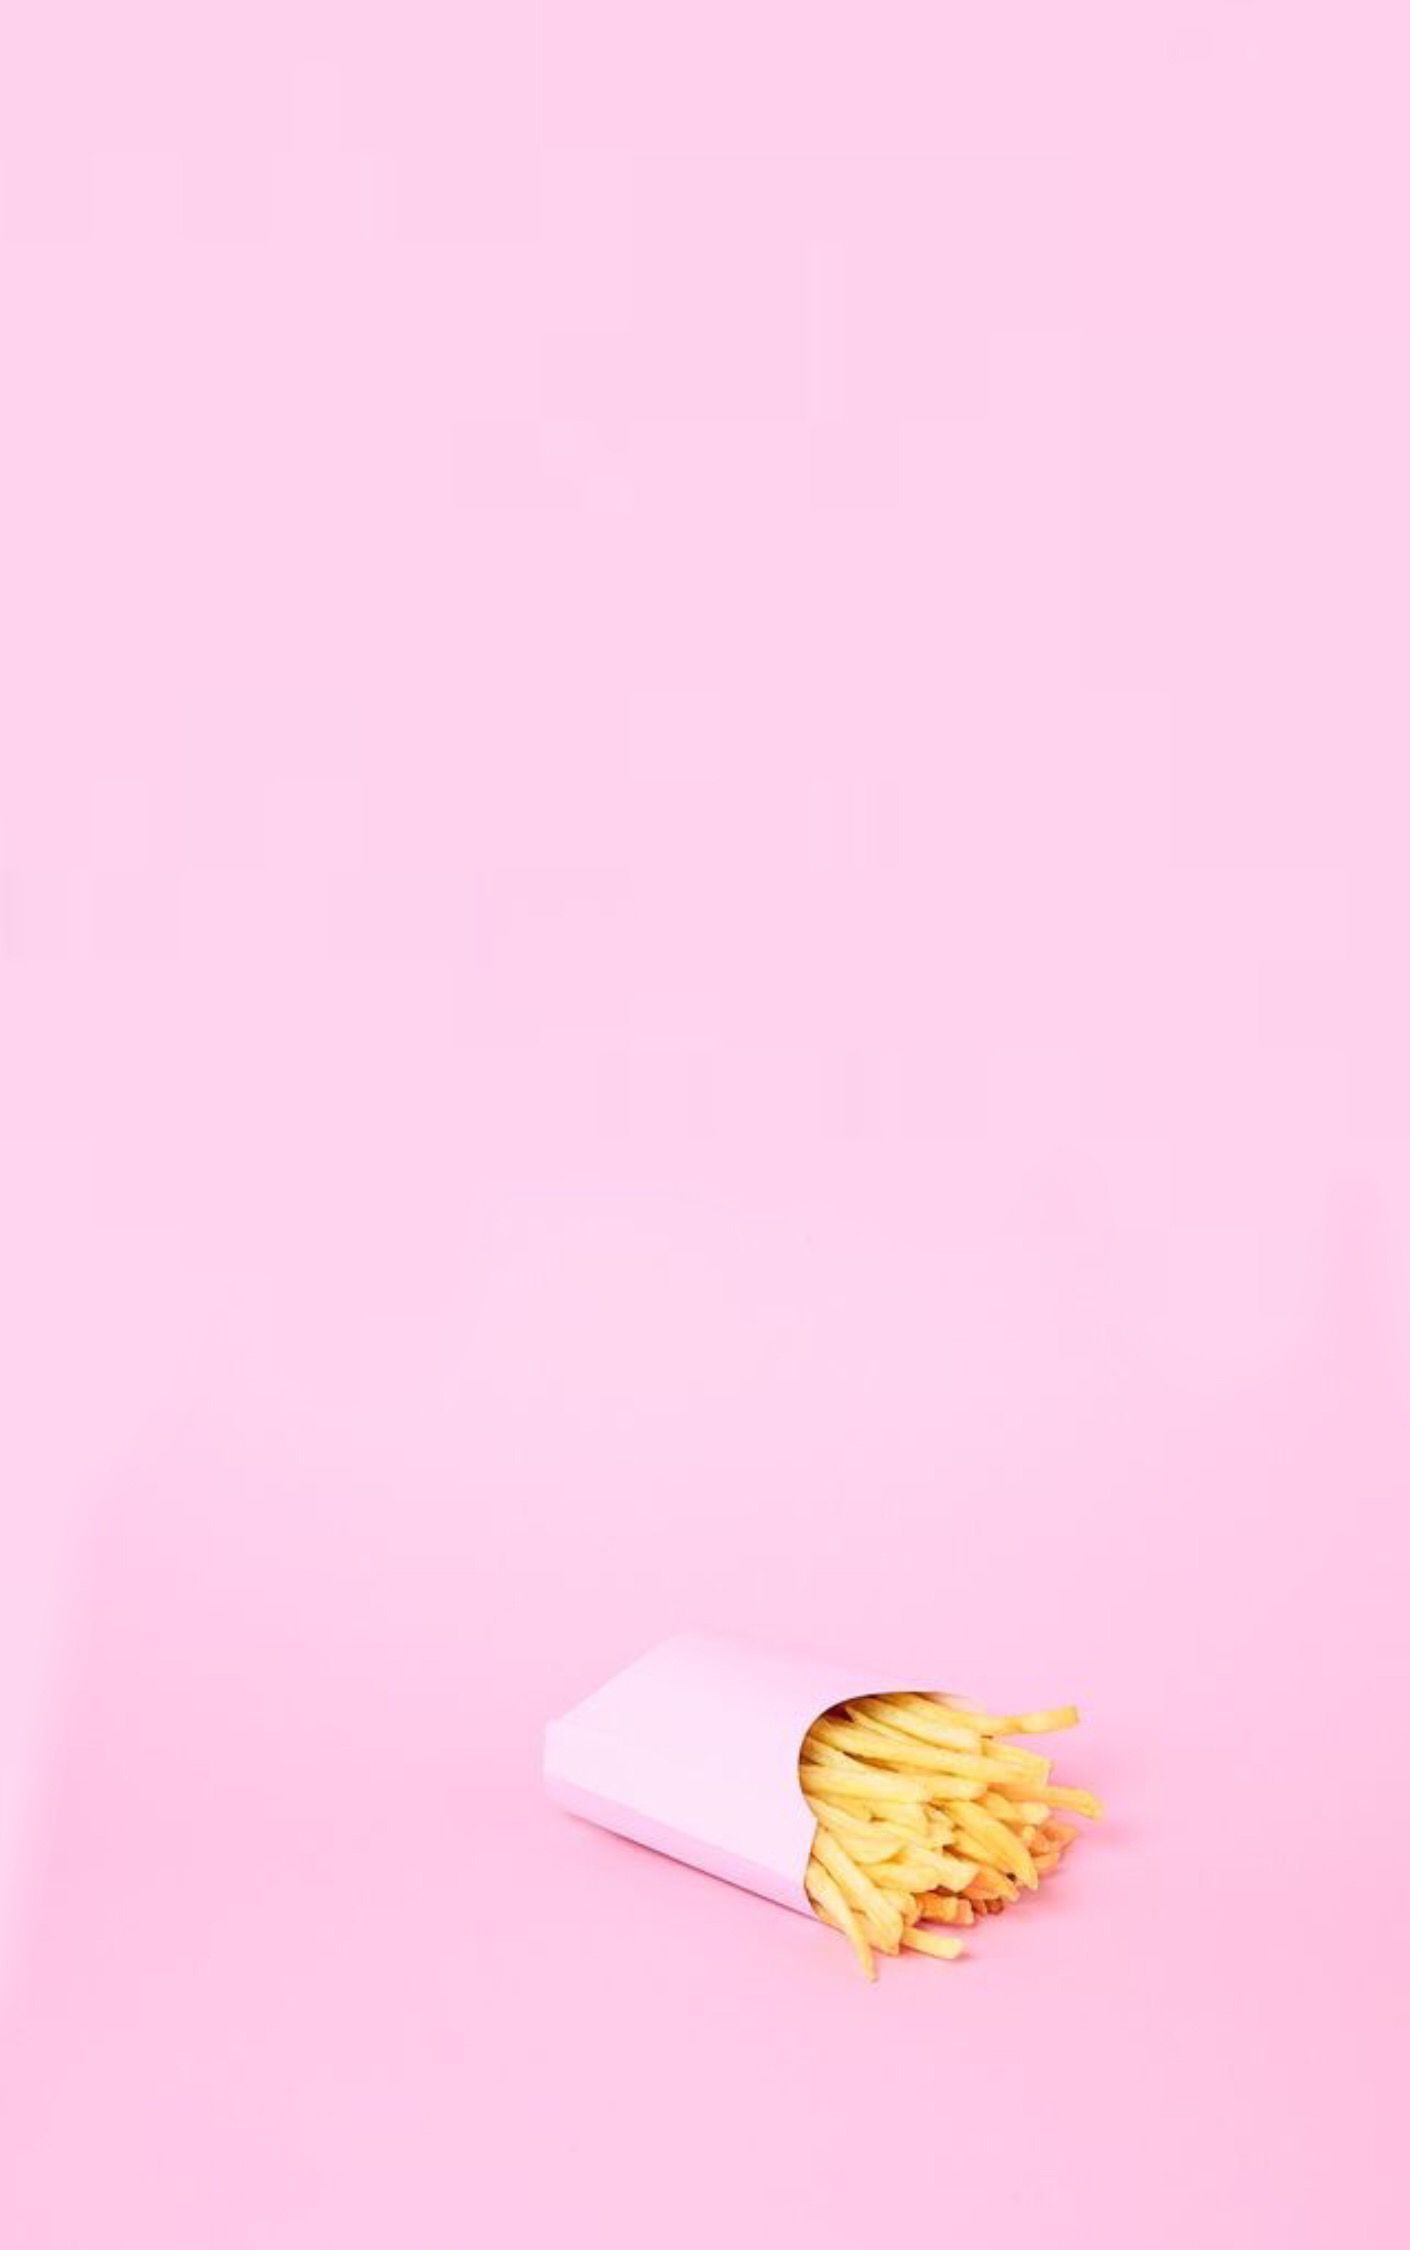 A pink paper bag of french fries on a pink background - Light pink, soft pink